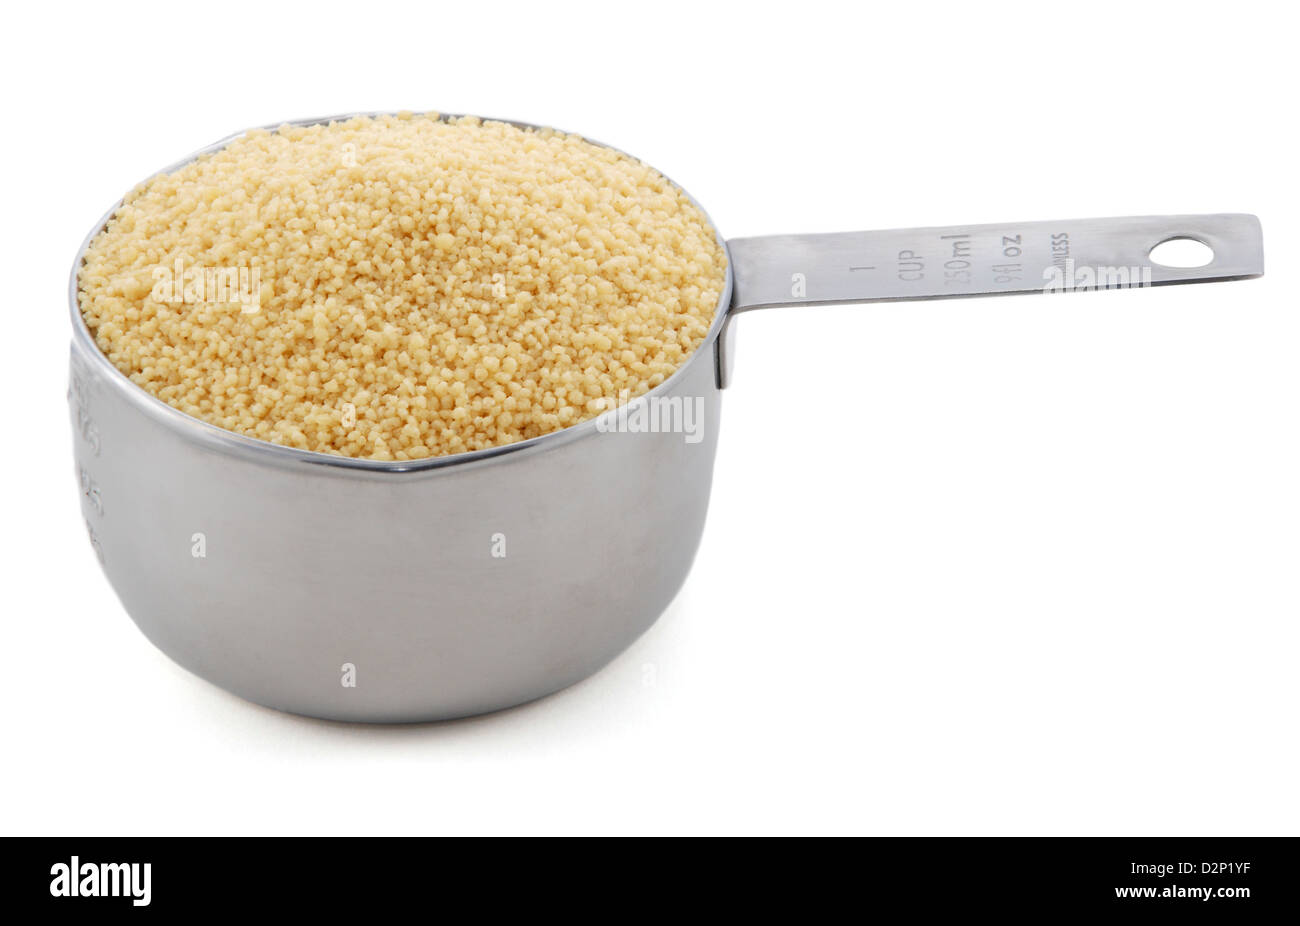 Cous cous presented in an American metal cup measure, isolated on a white background Stock Photo